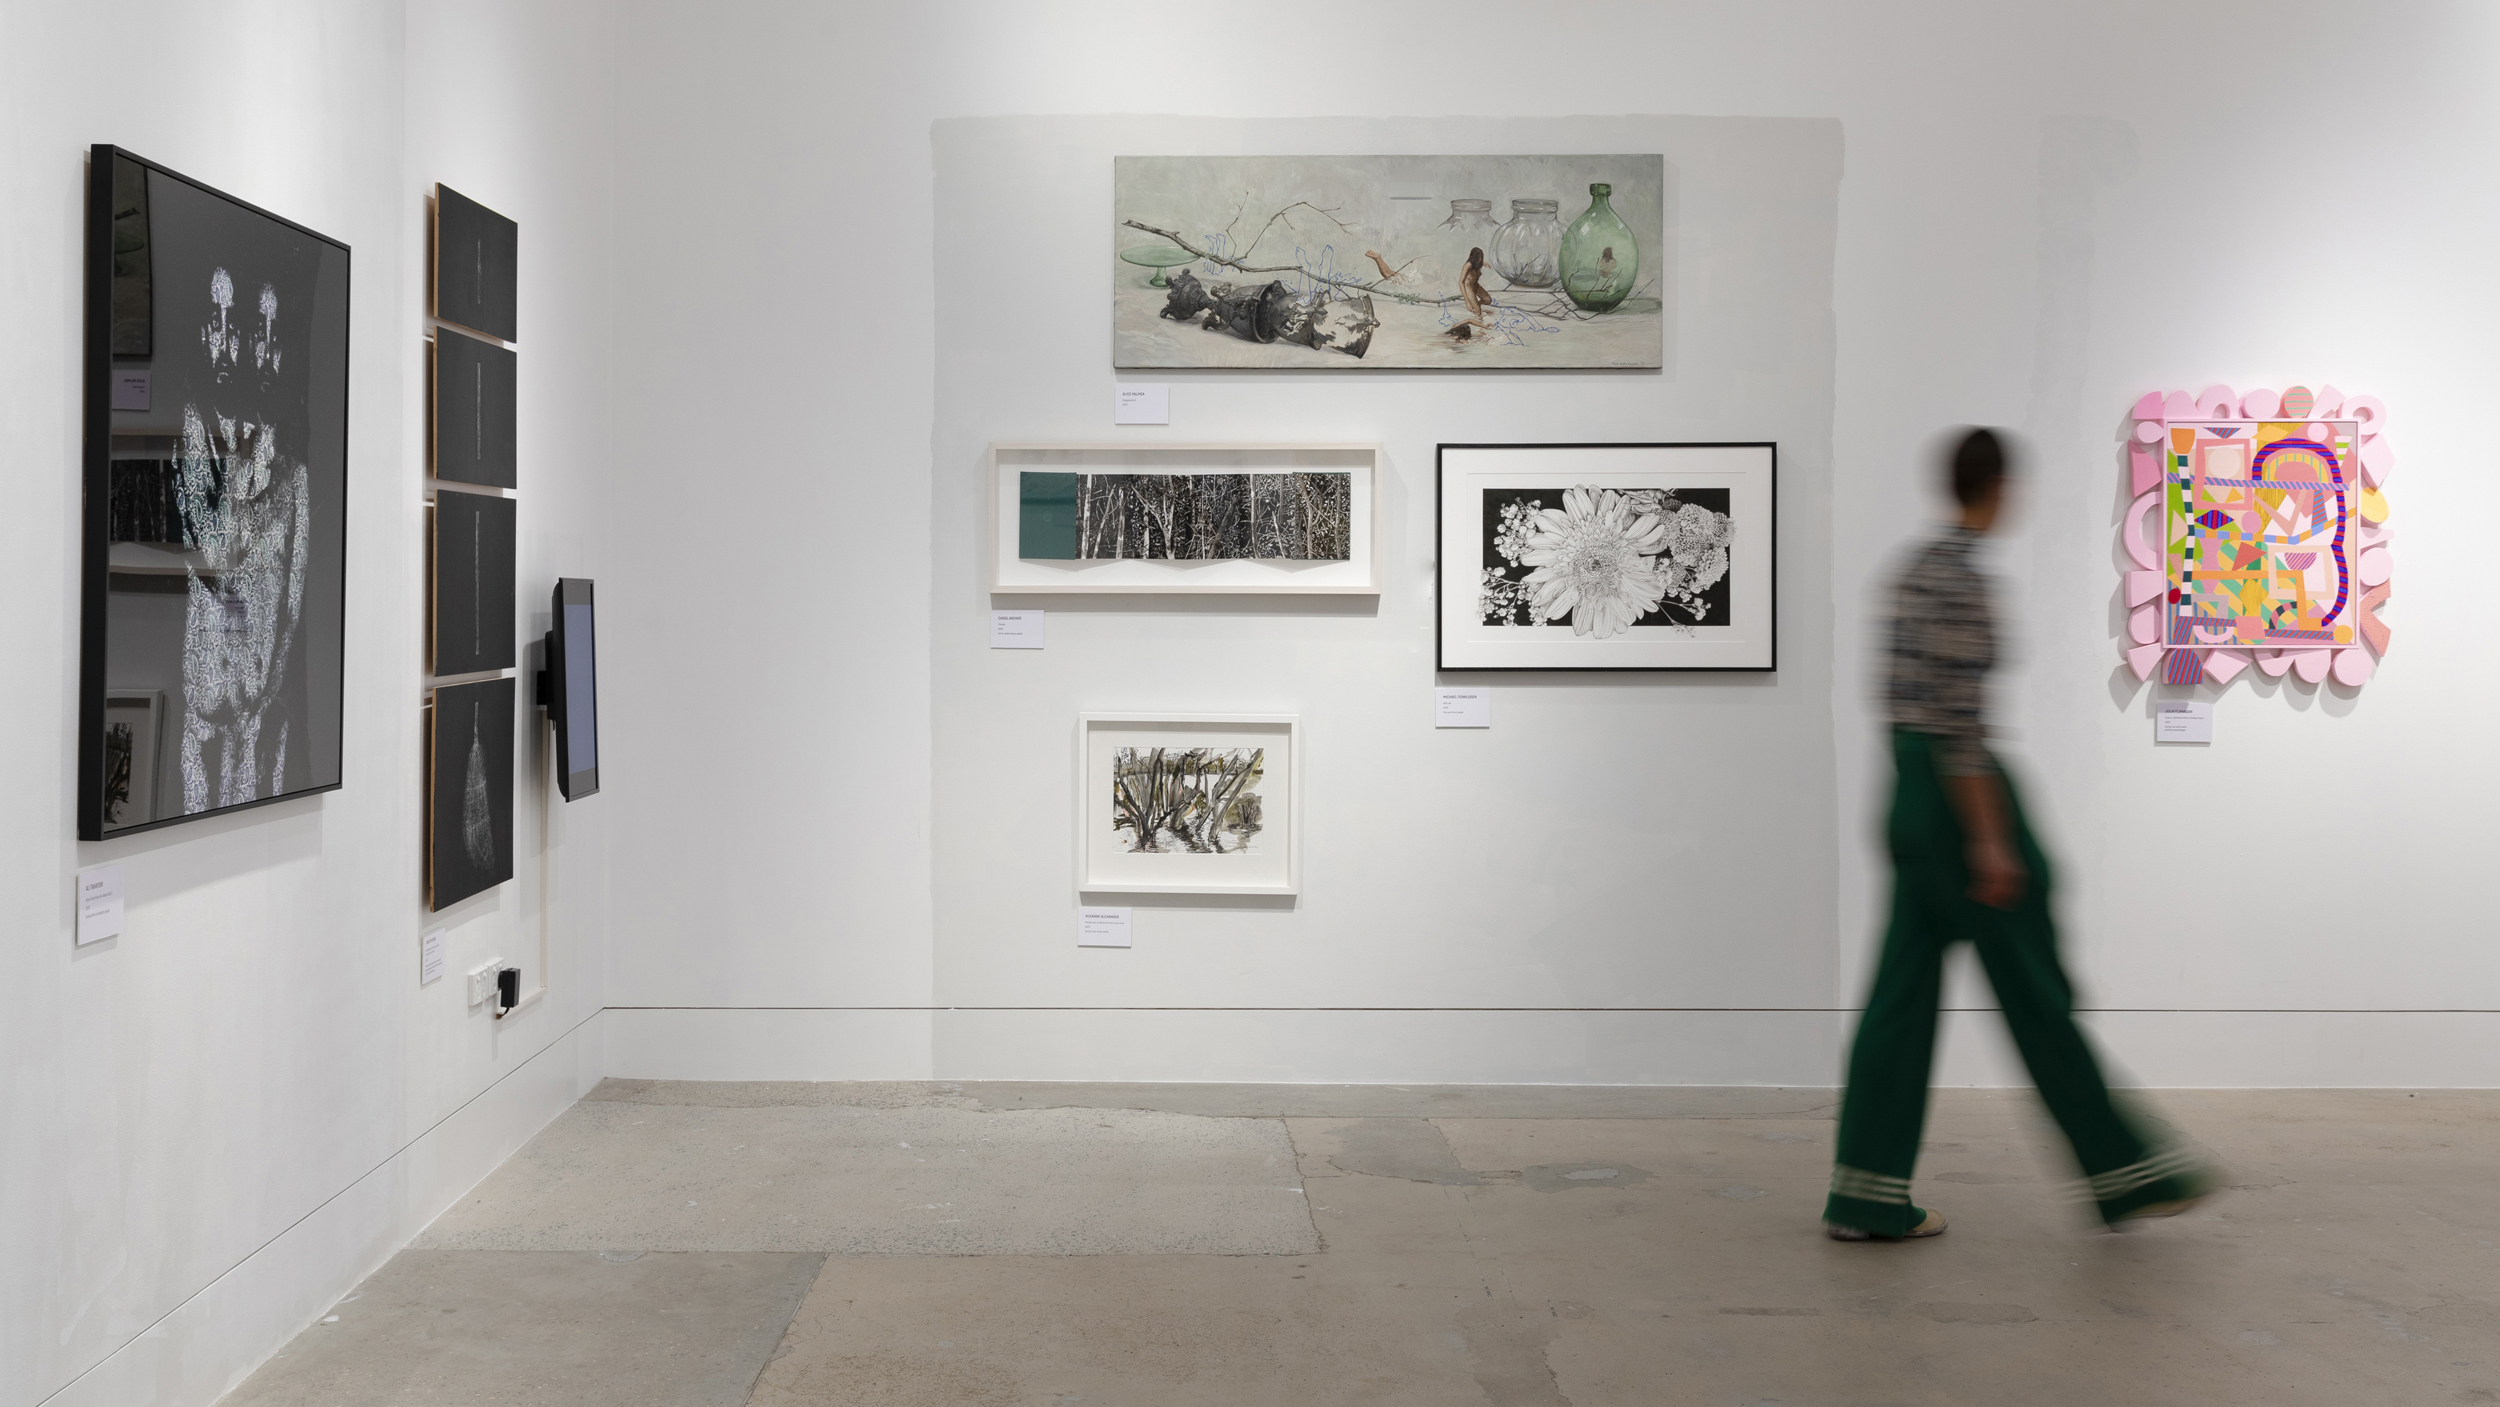 A photograph of a gallery corner, on the white walls are paintings and a screen. In front of it a blurry figure strides past.